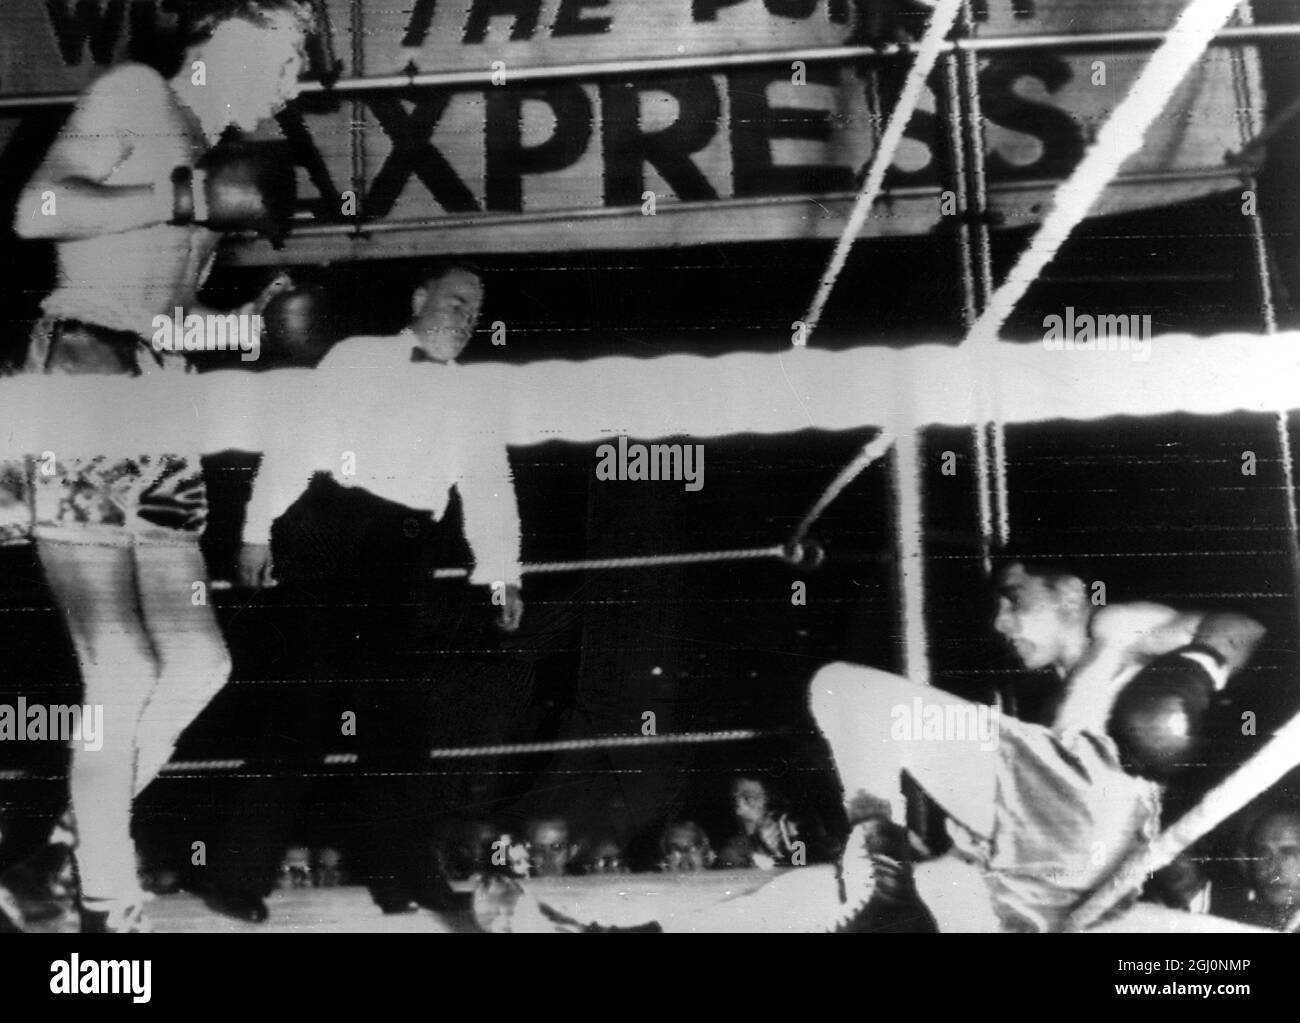 Jimmy Carruthers of Australia knocks Vic Toween of South Africa through the ropes prior to taking Toweel 's world bantam-weight title with a knock-out in the first round of their fight in Johannesburg , South Africa 18th November 1952 Stock Photo